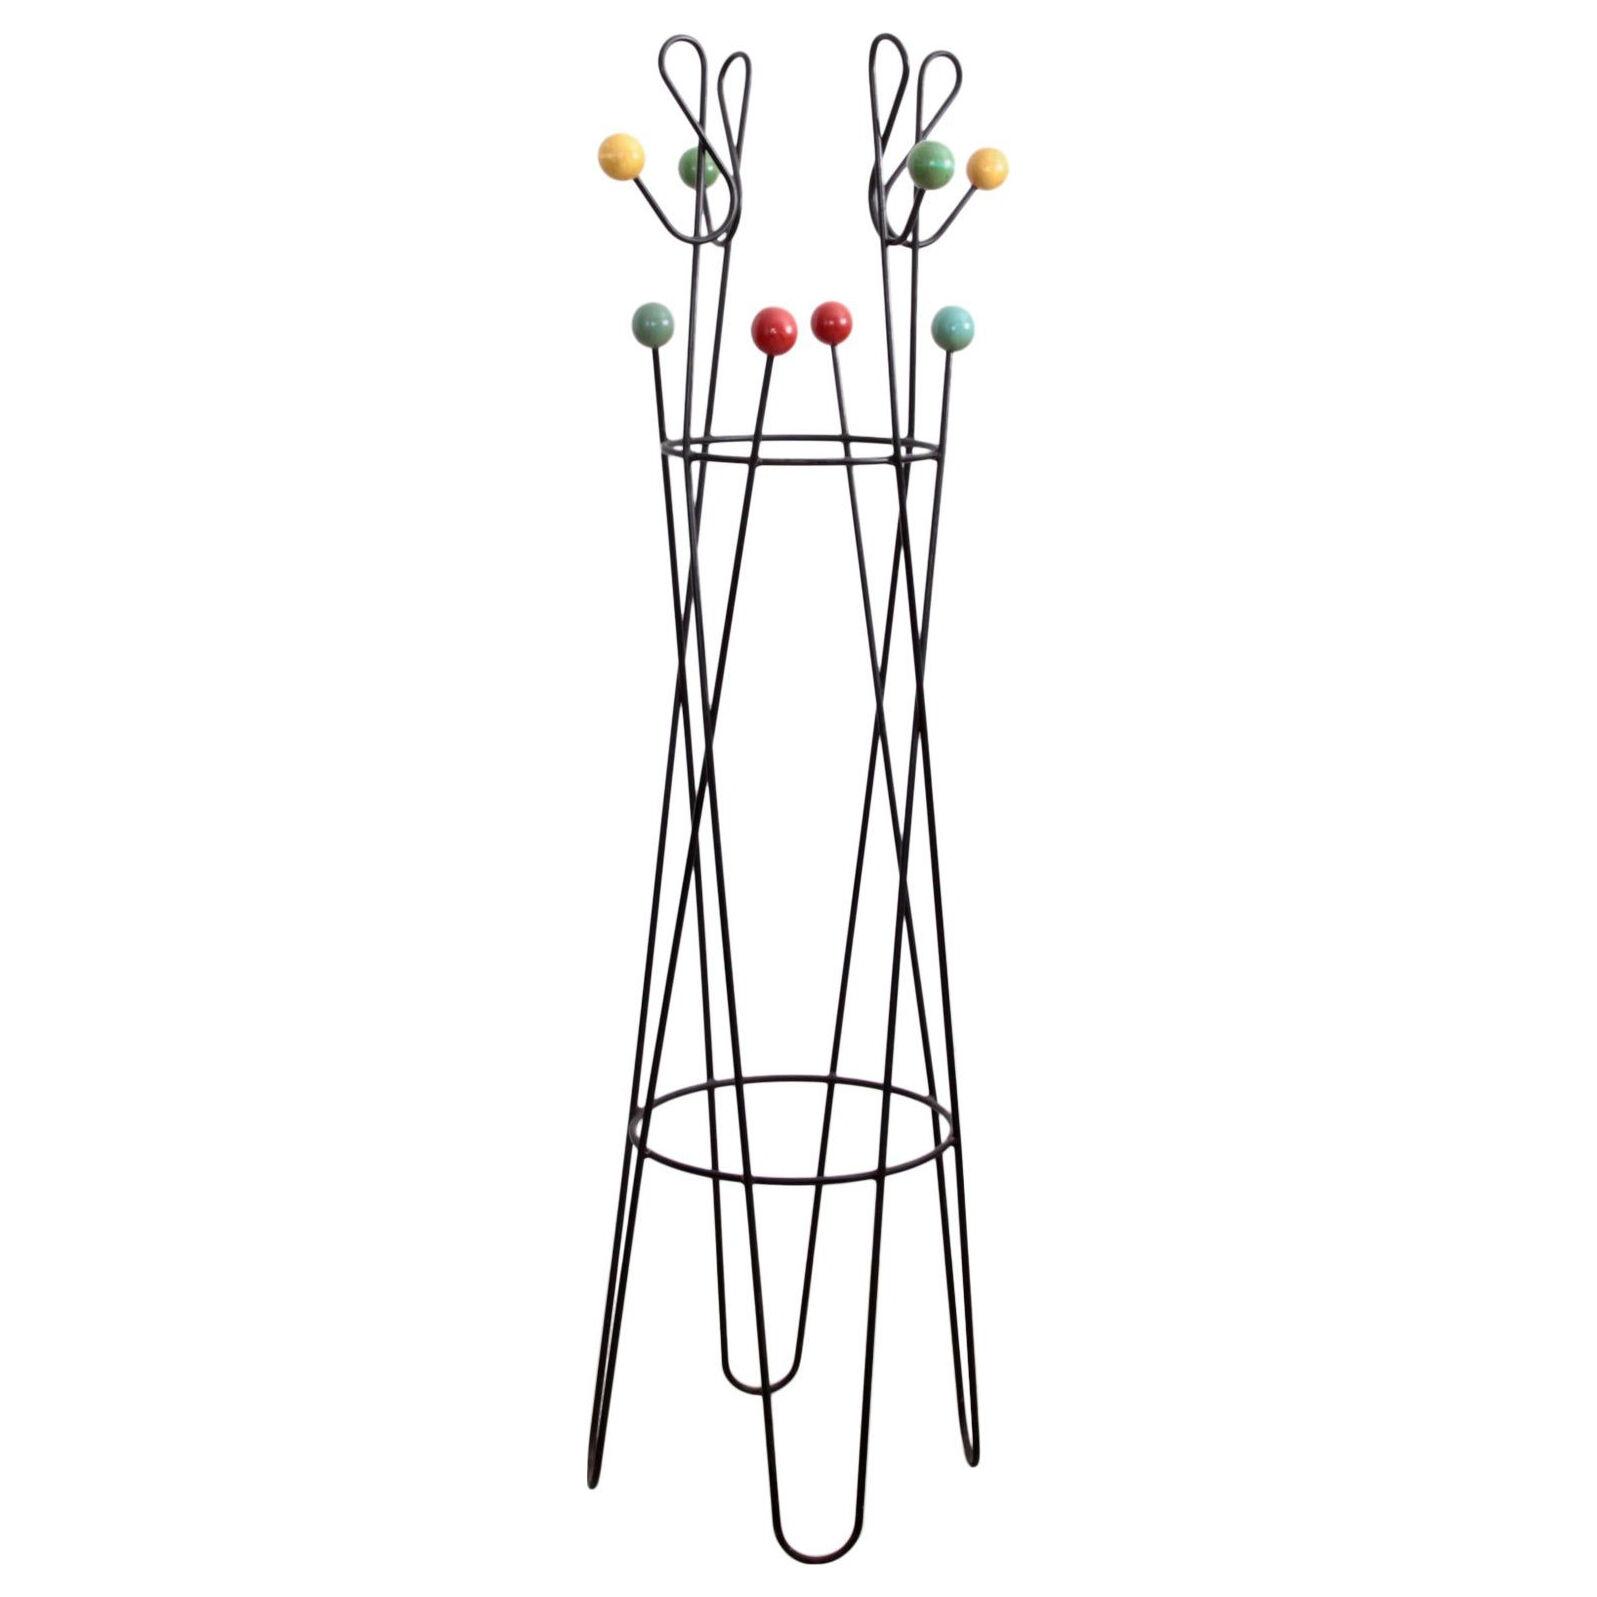 Multicolored Coat Rack Stand by Roger Feraud